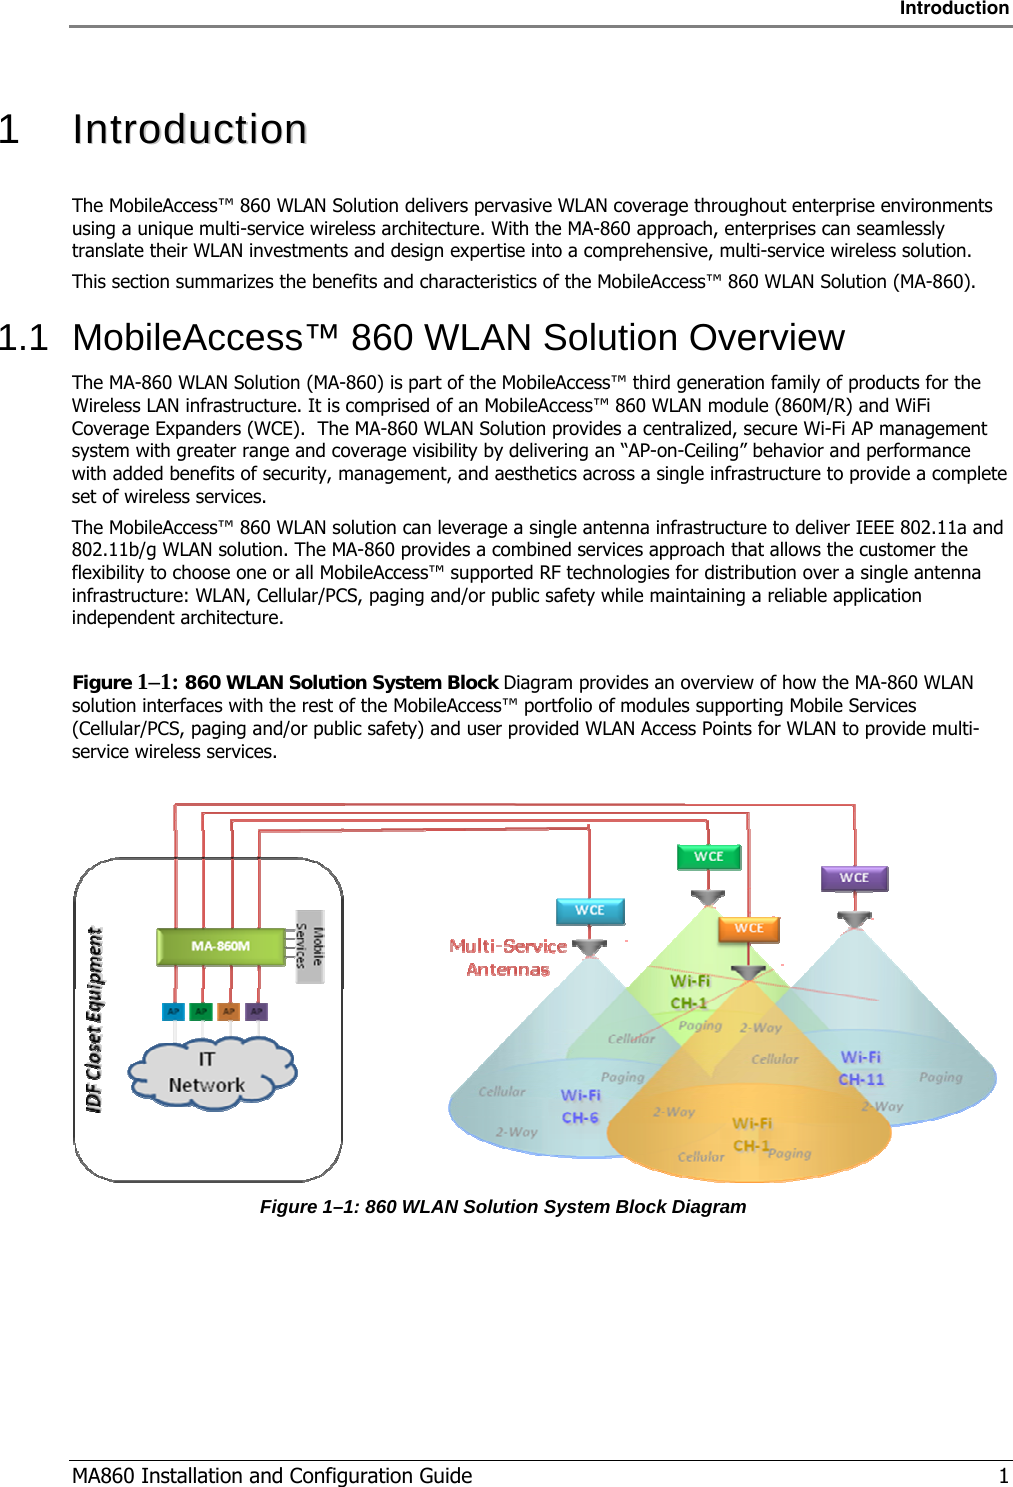 Introduction  MA860 Installation and Configuration Guide   1  1   IInnttrroodduuccttiioonn  The MobileAccess™ 860 WLAN Solution delivers pervasive WLAN coverage throughout enterprise environments using a unique multi-service wireless architecture. With the MA-860 approach, enterprises can seamlessly translate their WLAN investments and design expertise into a comprehensive, multi-service wireless solution. This section summarizes the benefits and characteristics of the MobileAccess™ 860 WLAN Solution (MA-860). 1.1  MobileAccess™ 860 WLAN Solution Overview The MA-860 WLAN Solution (MA-860) is part of the MobileAccess™ third generation family of products for the Wireless LAN infrastructure. It is comprised of an MobileAccess™ 860 WLAN module (860M/R) and WiFi Coverage Expanders (WCE).  The MA-860 WLAN Solution provides a centralized, secure Wi-Fi AP management system with greater range and coverage visibility by delivering an “AP-on-Ceiling” behavior and performance with added benefits of security, management, and aesthetics across a single infrastructure to provide a complete set of wireless services. The MobileAccess™ 860 WLAN solution can leverage a single antenna infrastructure to deliver IEEE 802.11a and 802.11b/g WLAN solution. The MA-860 provides a combined services approach that allows the customer the flexibility to choose one or all MobileAccess™ supported RF technologies for distribution over a single antenna infrastructure: WLAN, Cellular/PCS, paging and/or public safety while maintaining a reliable application independent architecture.  Figure  1–1: 860 WLAN Solution System Block Diagram provides an overview of how the MA-860 WLAN solution interfaces with the rest of the MobileAccess™ portfolio of modules supporting Mobile Services (Cellular/PCS, paging and/or public safety) and user provided WLAN Access Points for WLAN to provide multi-service wireless services.   Figure  1–1: 860 WLAN Solution System Block Diagram 